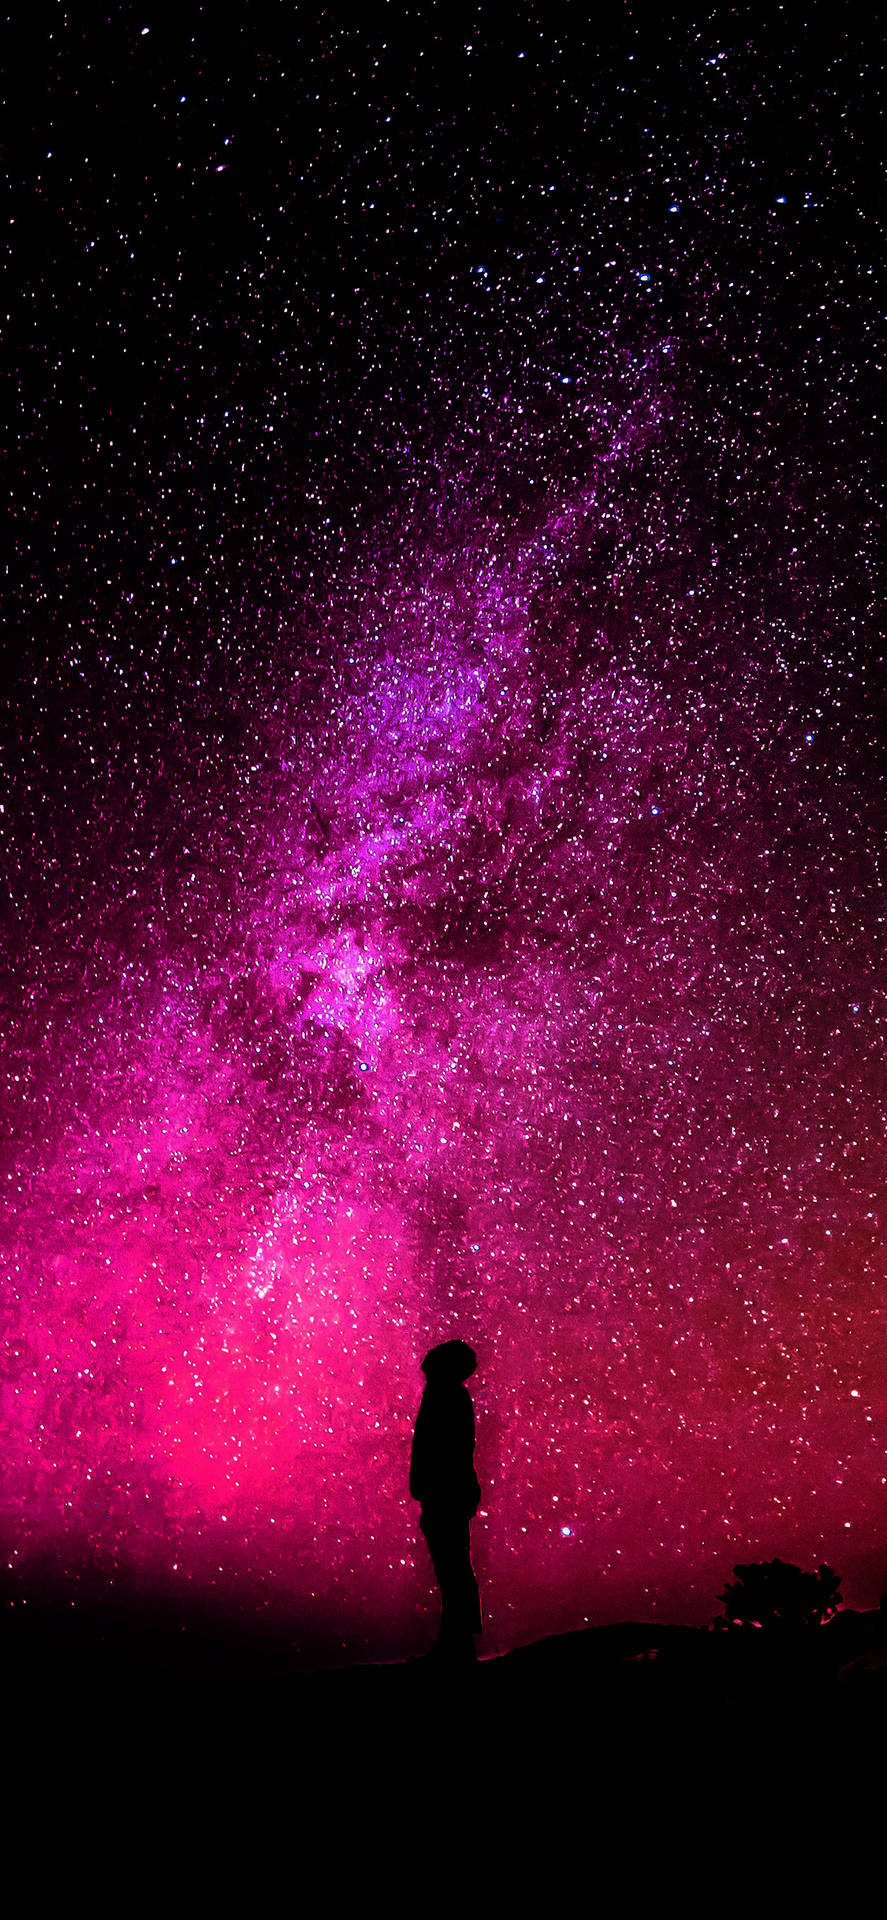 Man Silhouette Over Pink Galaxy Iphone